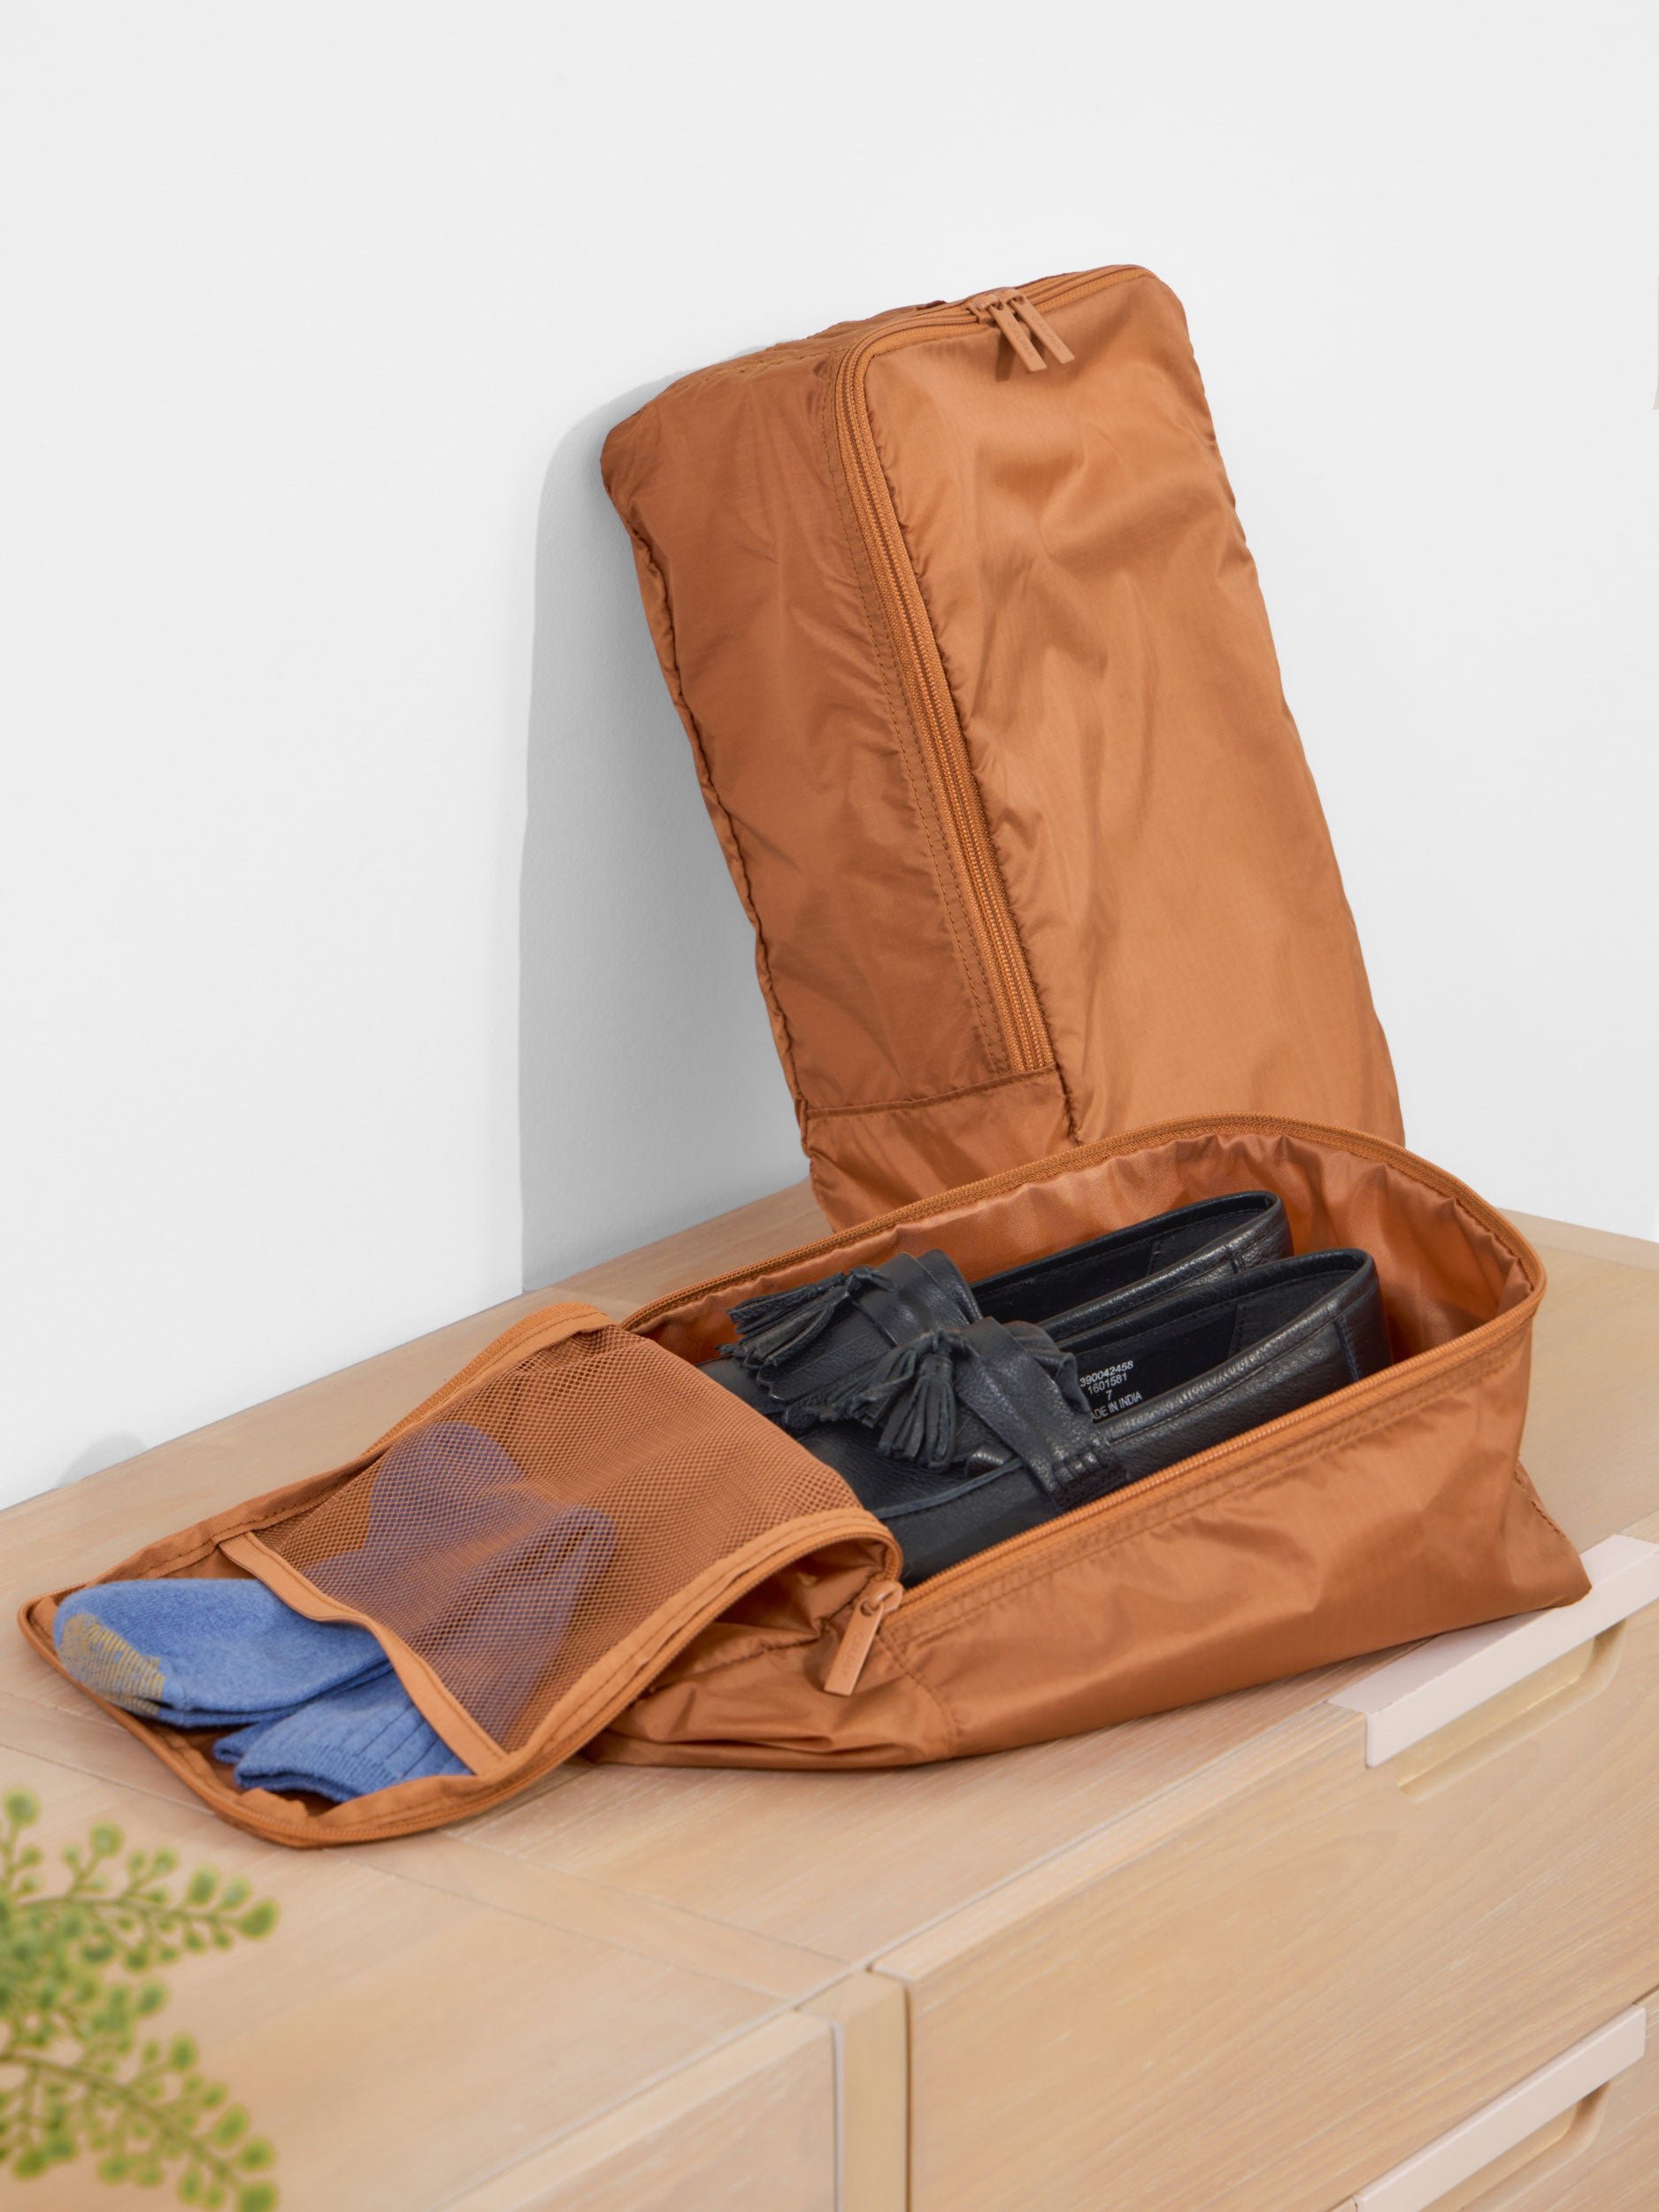 CALPAK Compakt Shoe Bag with shoes inside main compartments and socks within mesh interior pocket